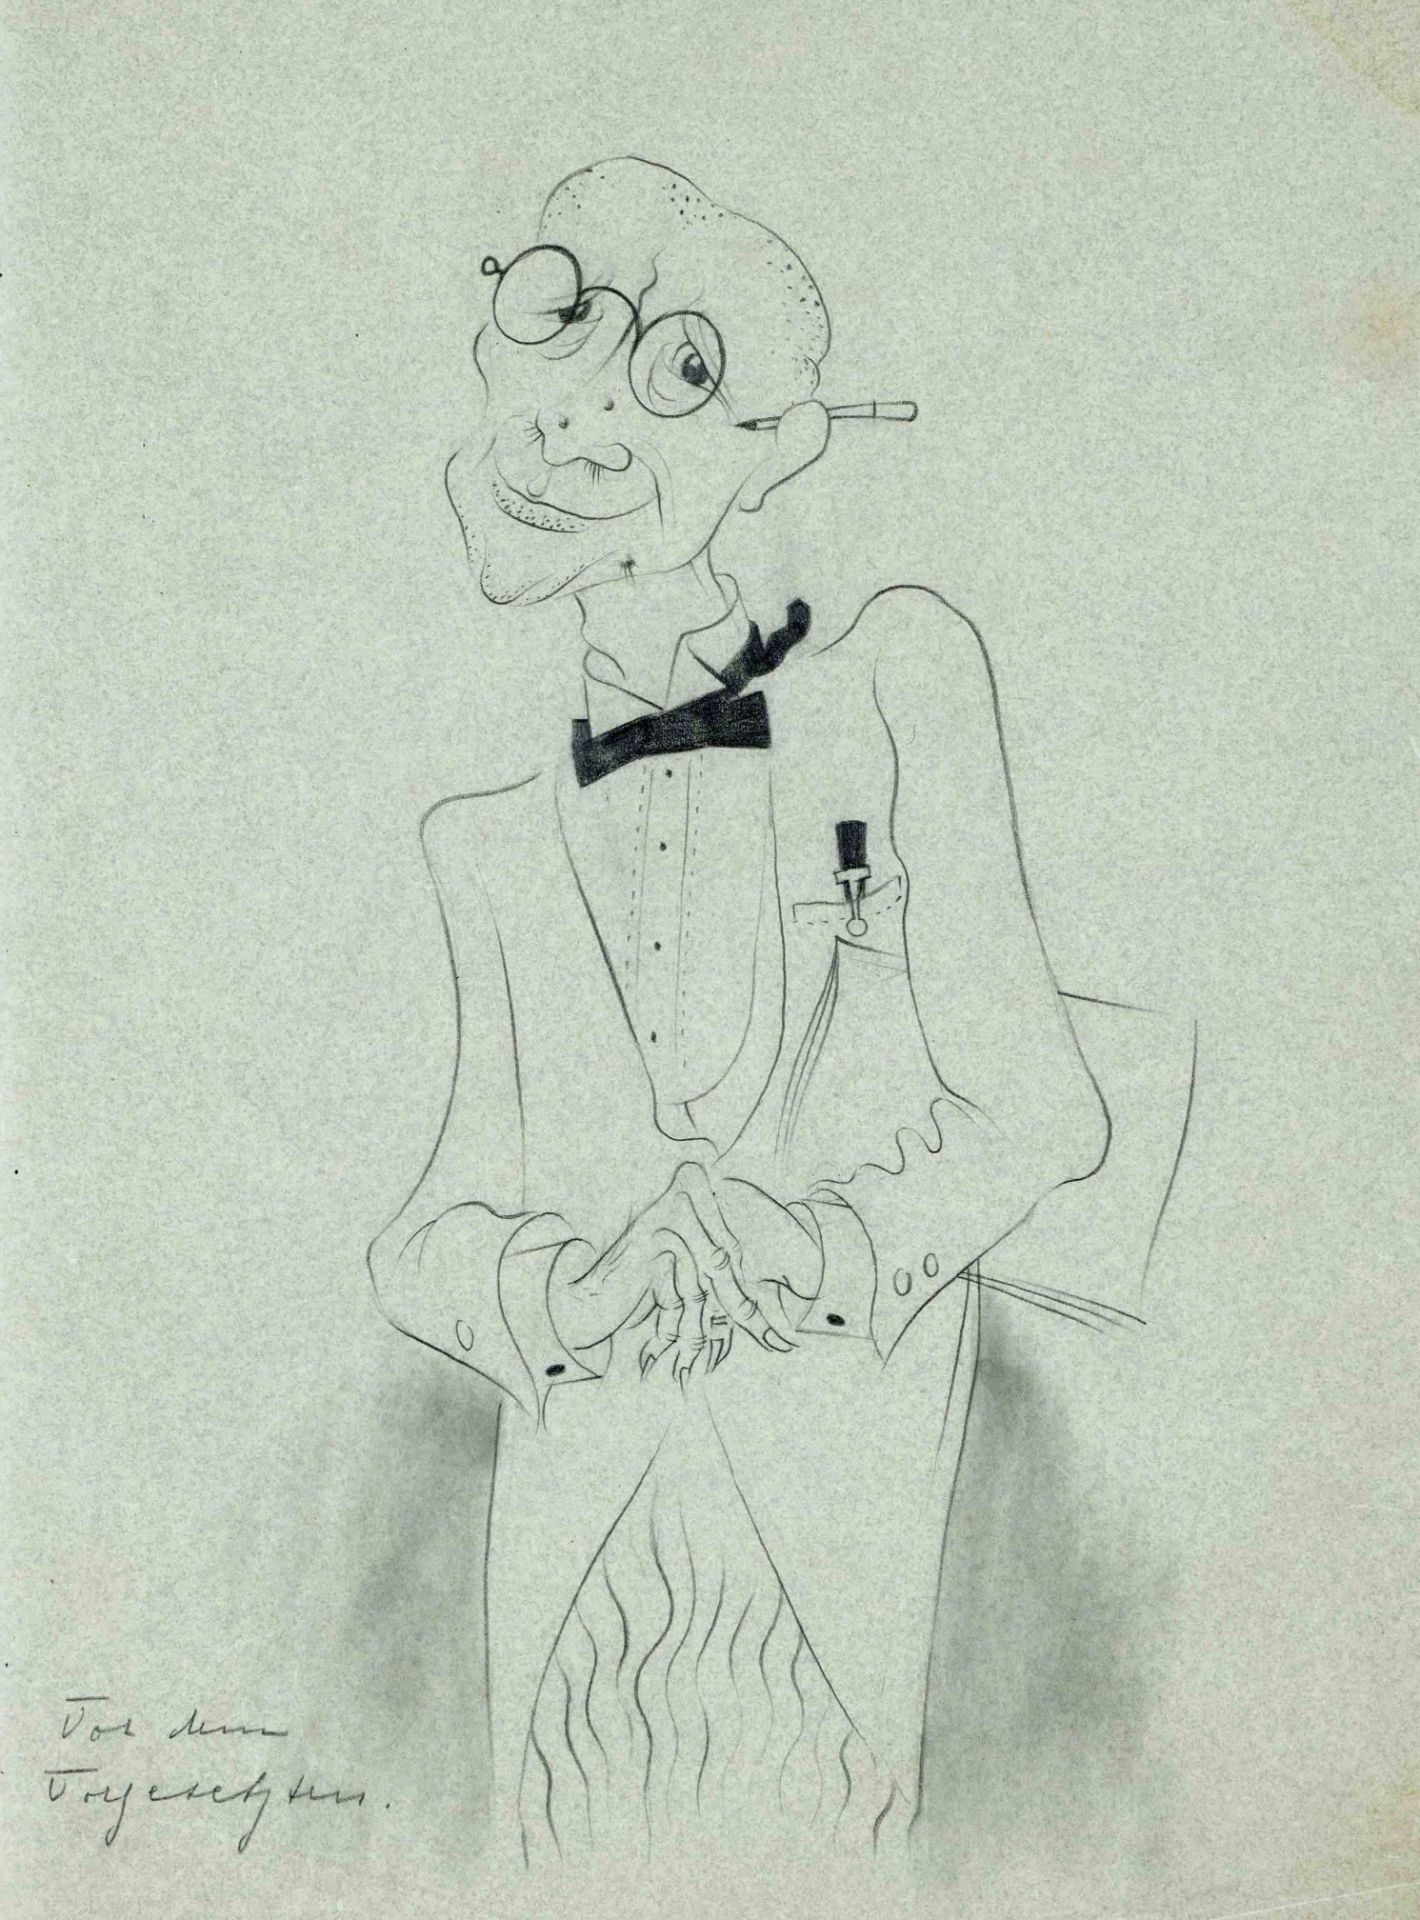 Rudolf Fust, bundle of 3 caricatures from the 1920s by the German painter, graphic artist and